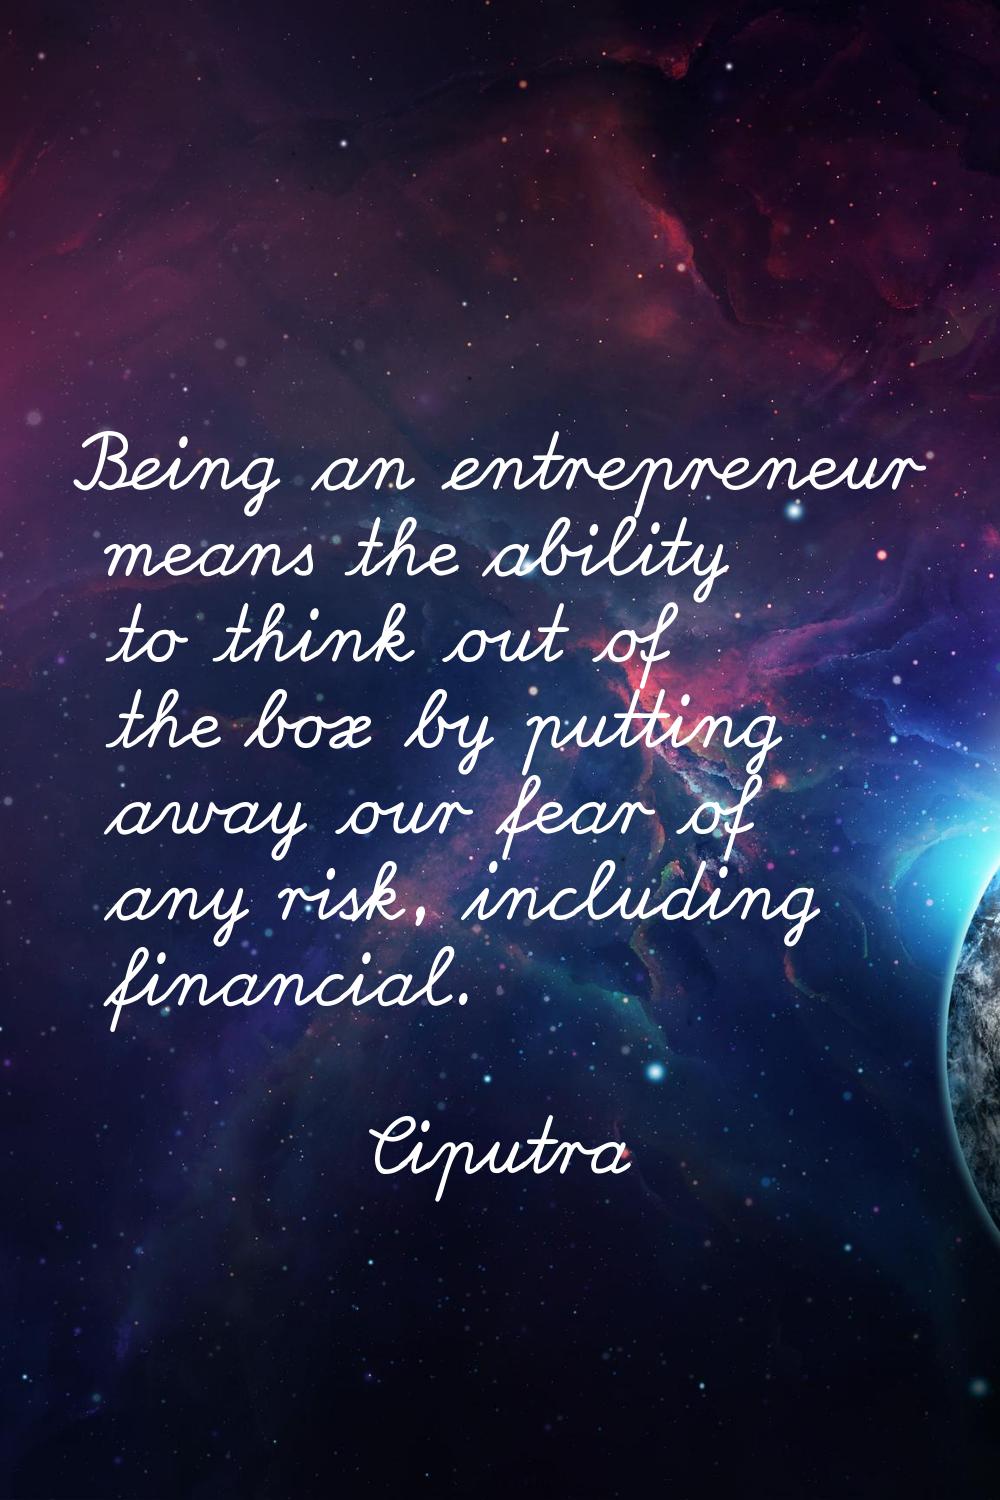 Being an entrepreneur means the ability to think out of the box by putting away our fear of any ris